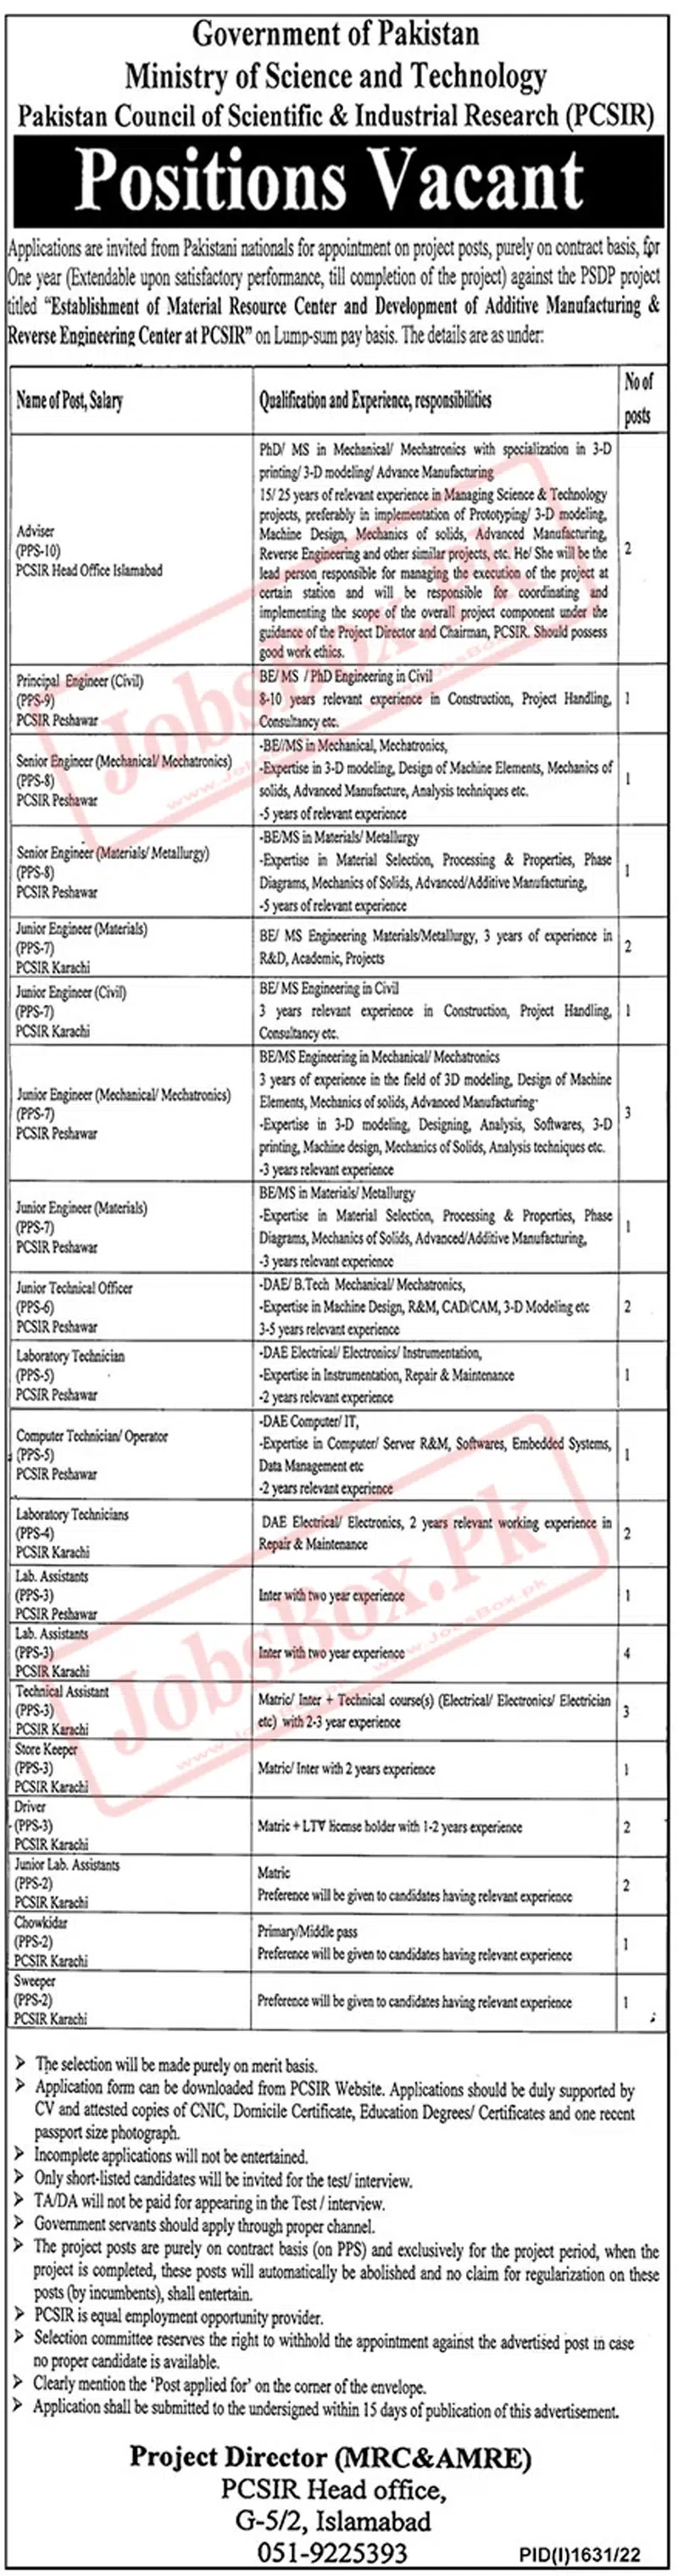 Ministry of Science and Technology Jobs 2022 Recruitment for PCSIR